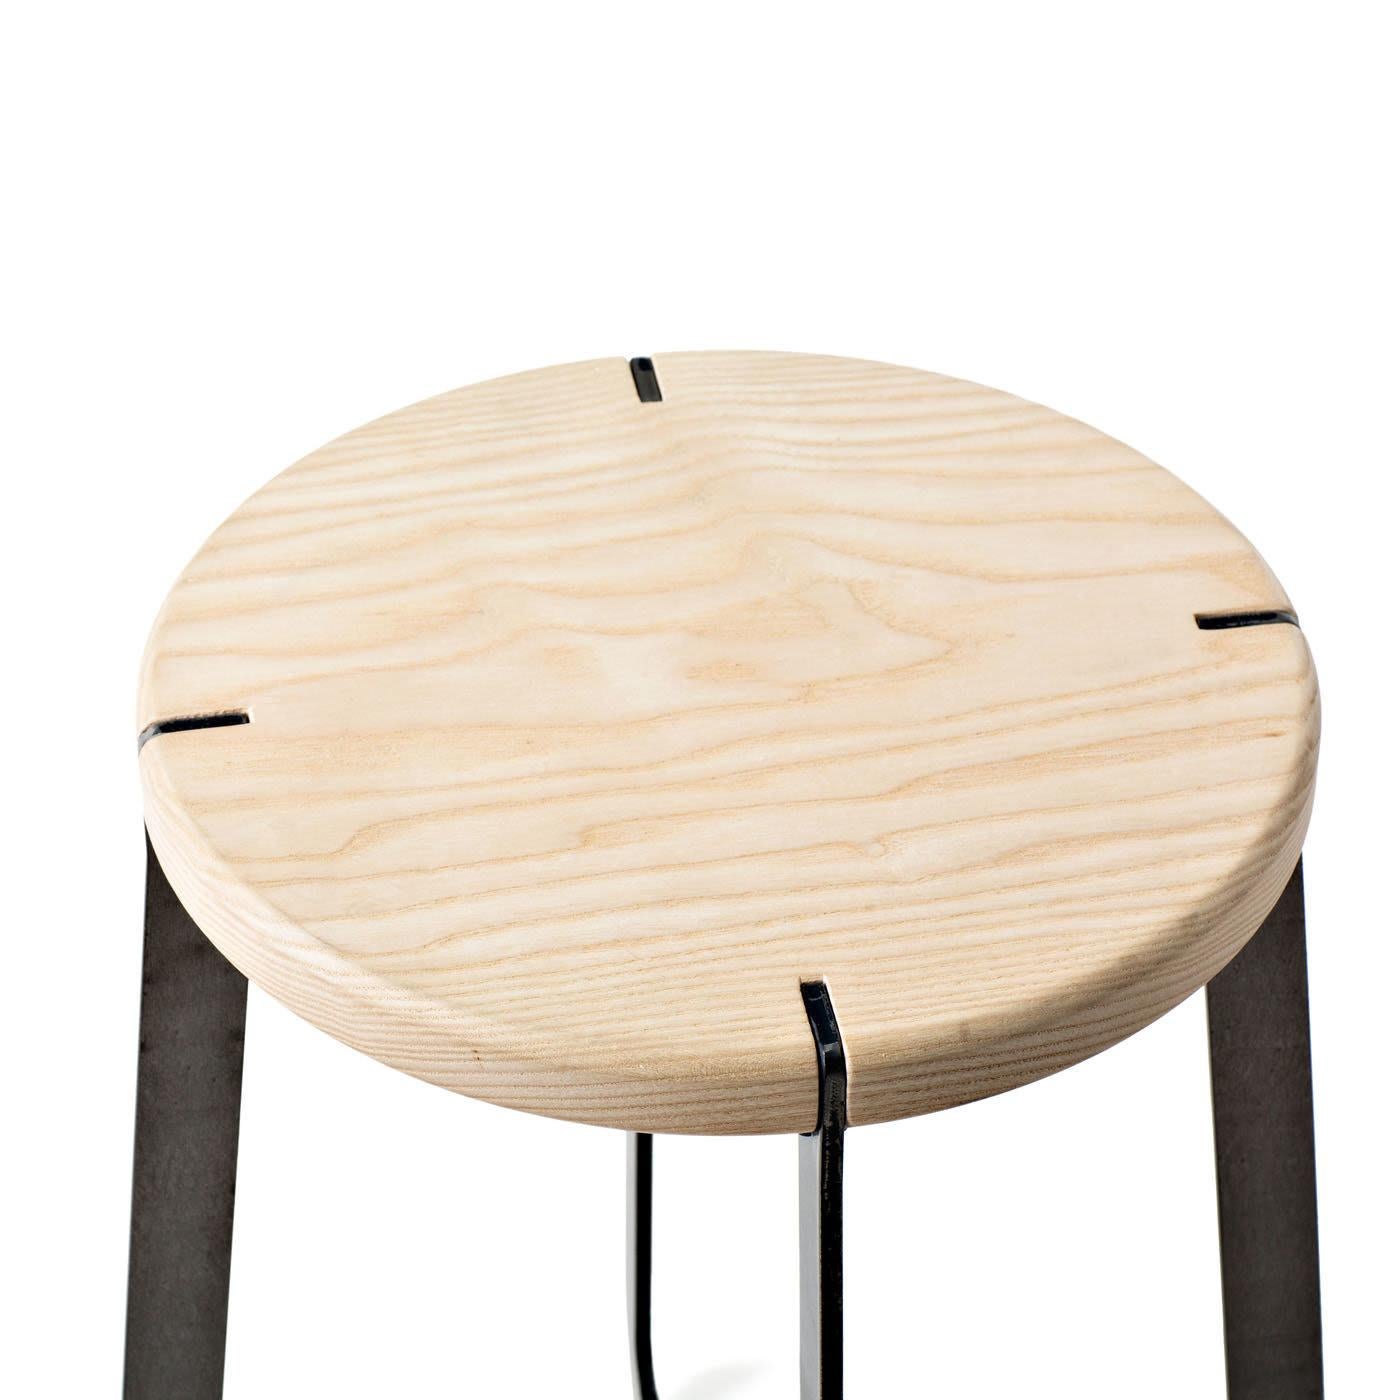 This stool bears a minimalist sophistication, its name inspired by one of the most extraordinary territories in the Mediterranean, Puglia. This piece evokes a distinct harmony, mixing two contrasting materials for a flawless effect. The varnished